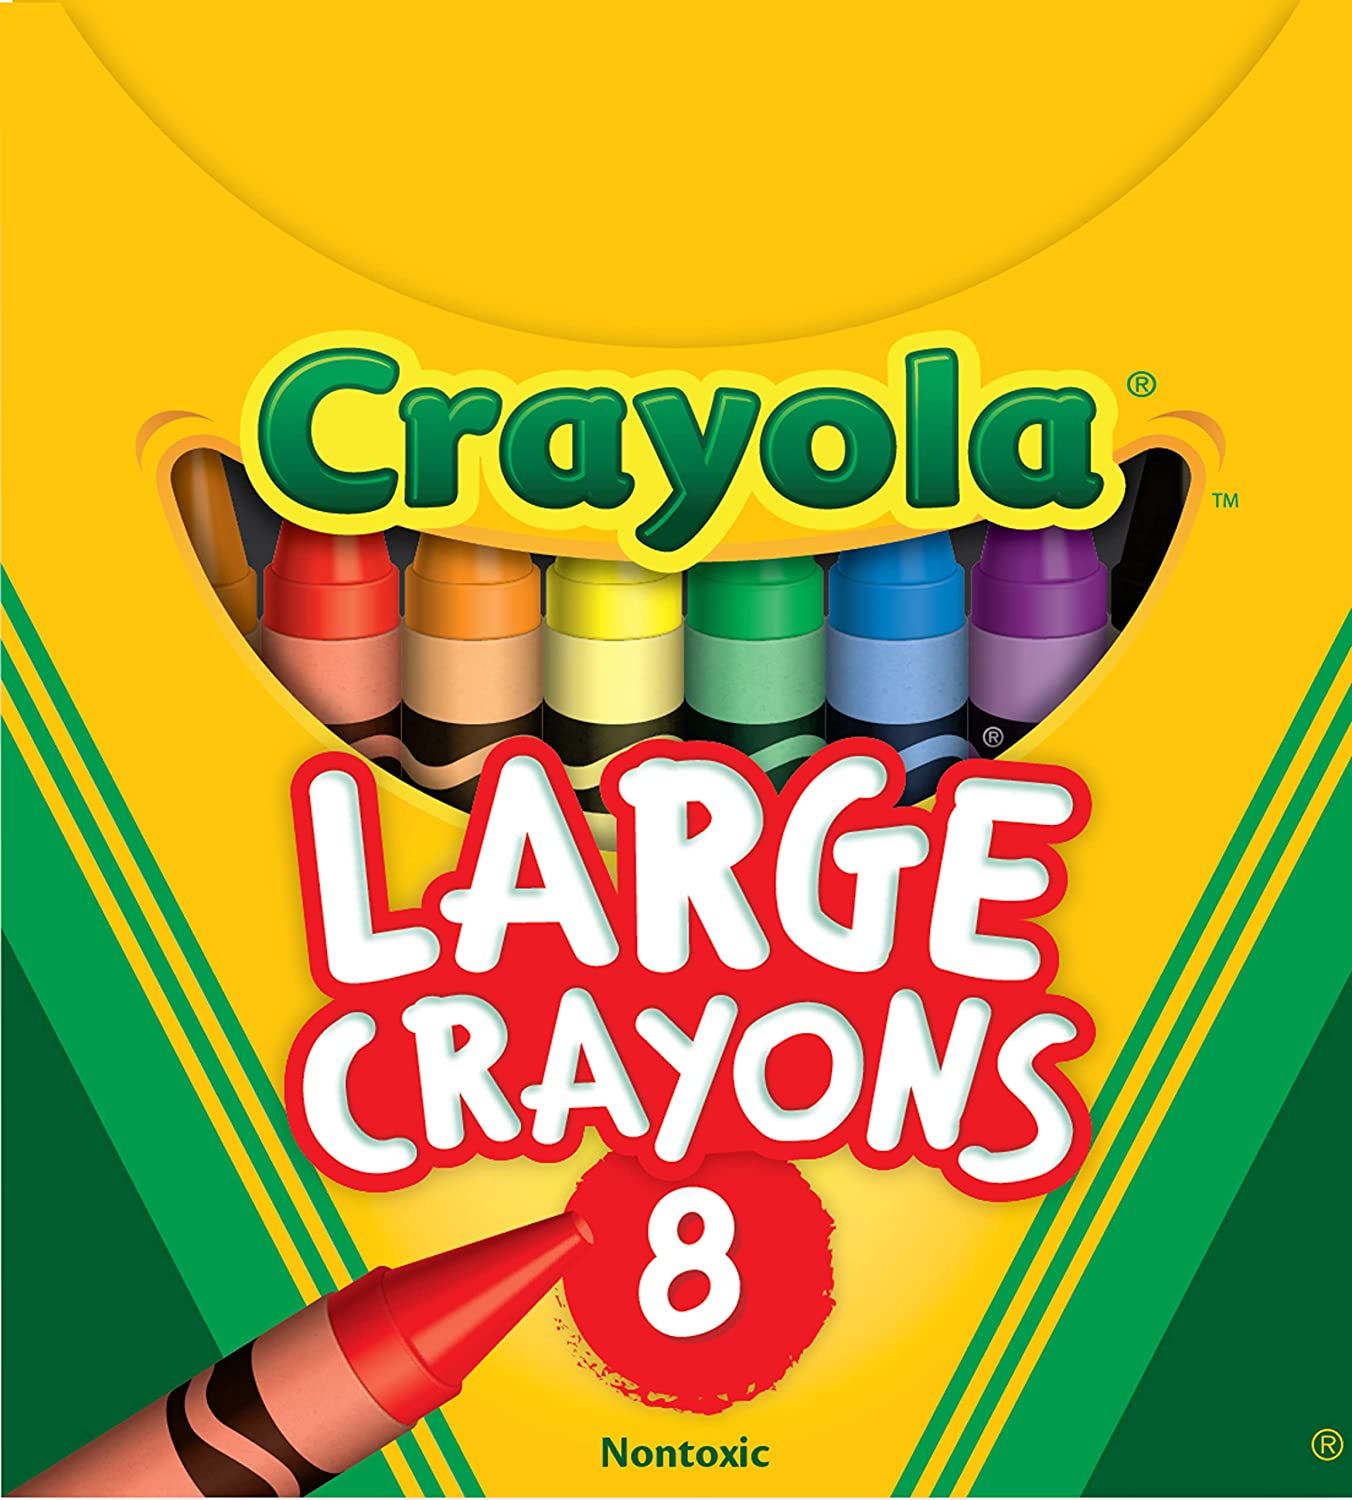 Crayola Large Crayons - Assorted (8 Count), Giant Crayons for Kids & Toddlers, Ages 2+